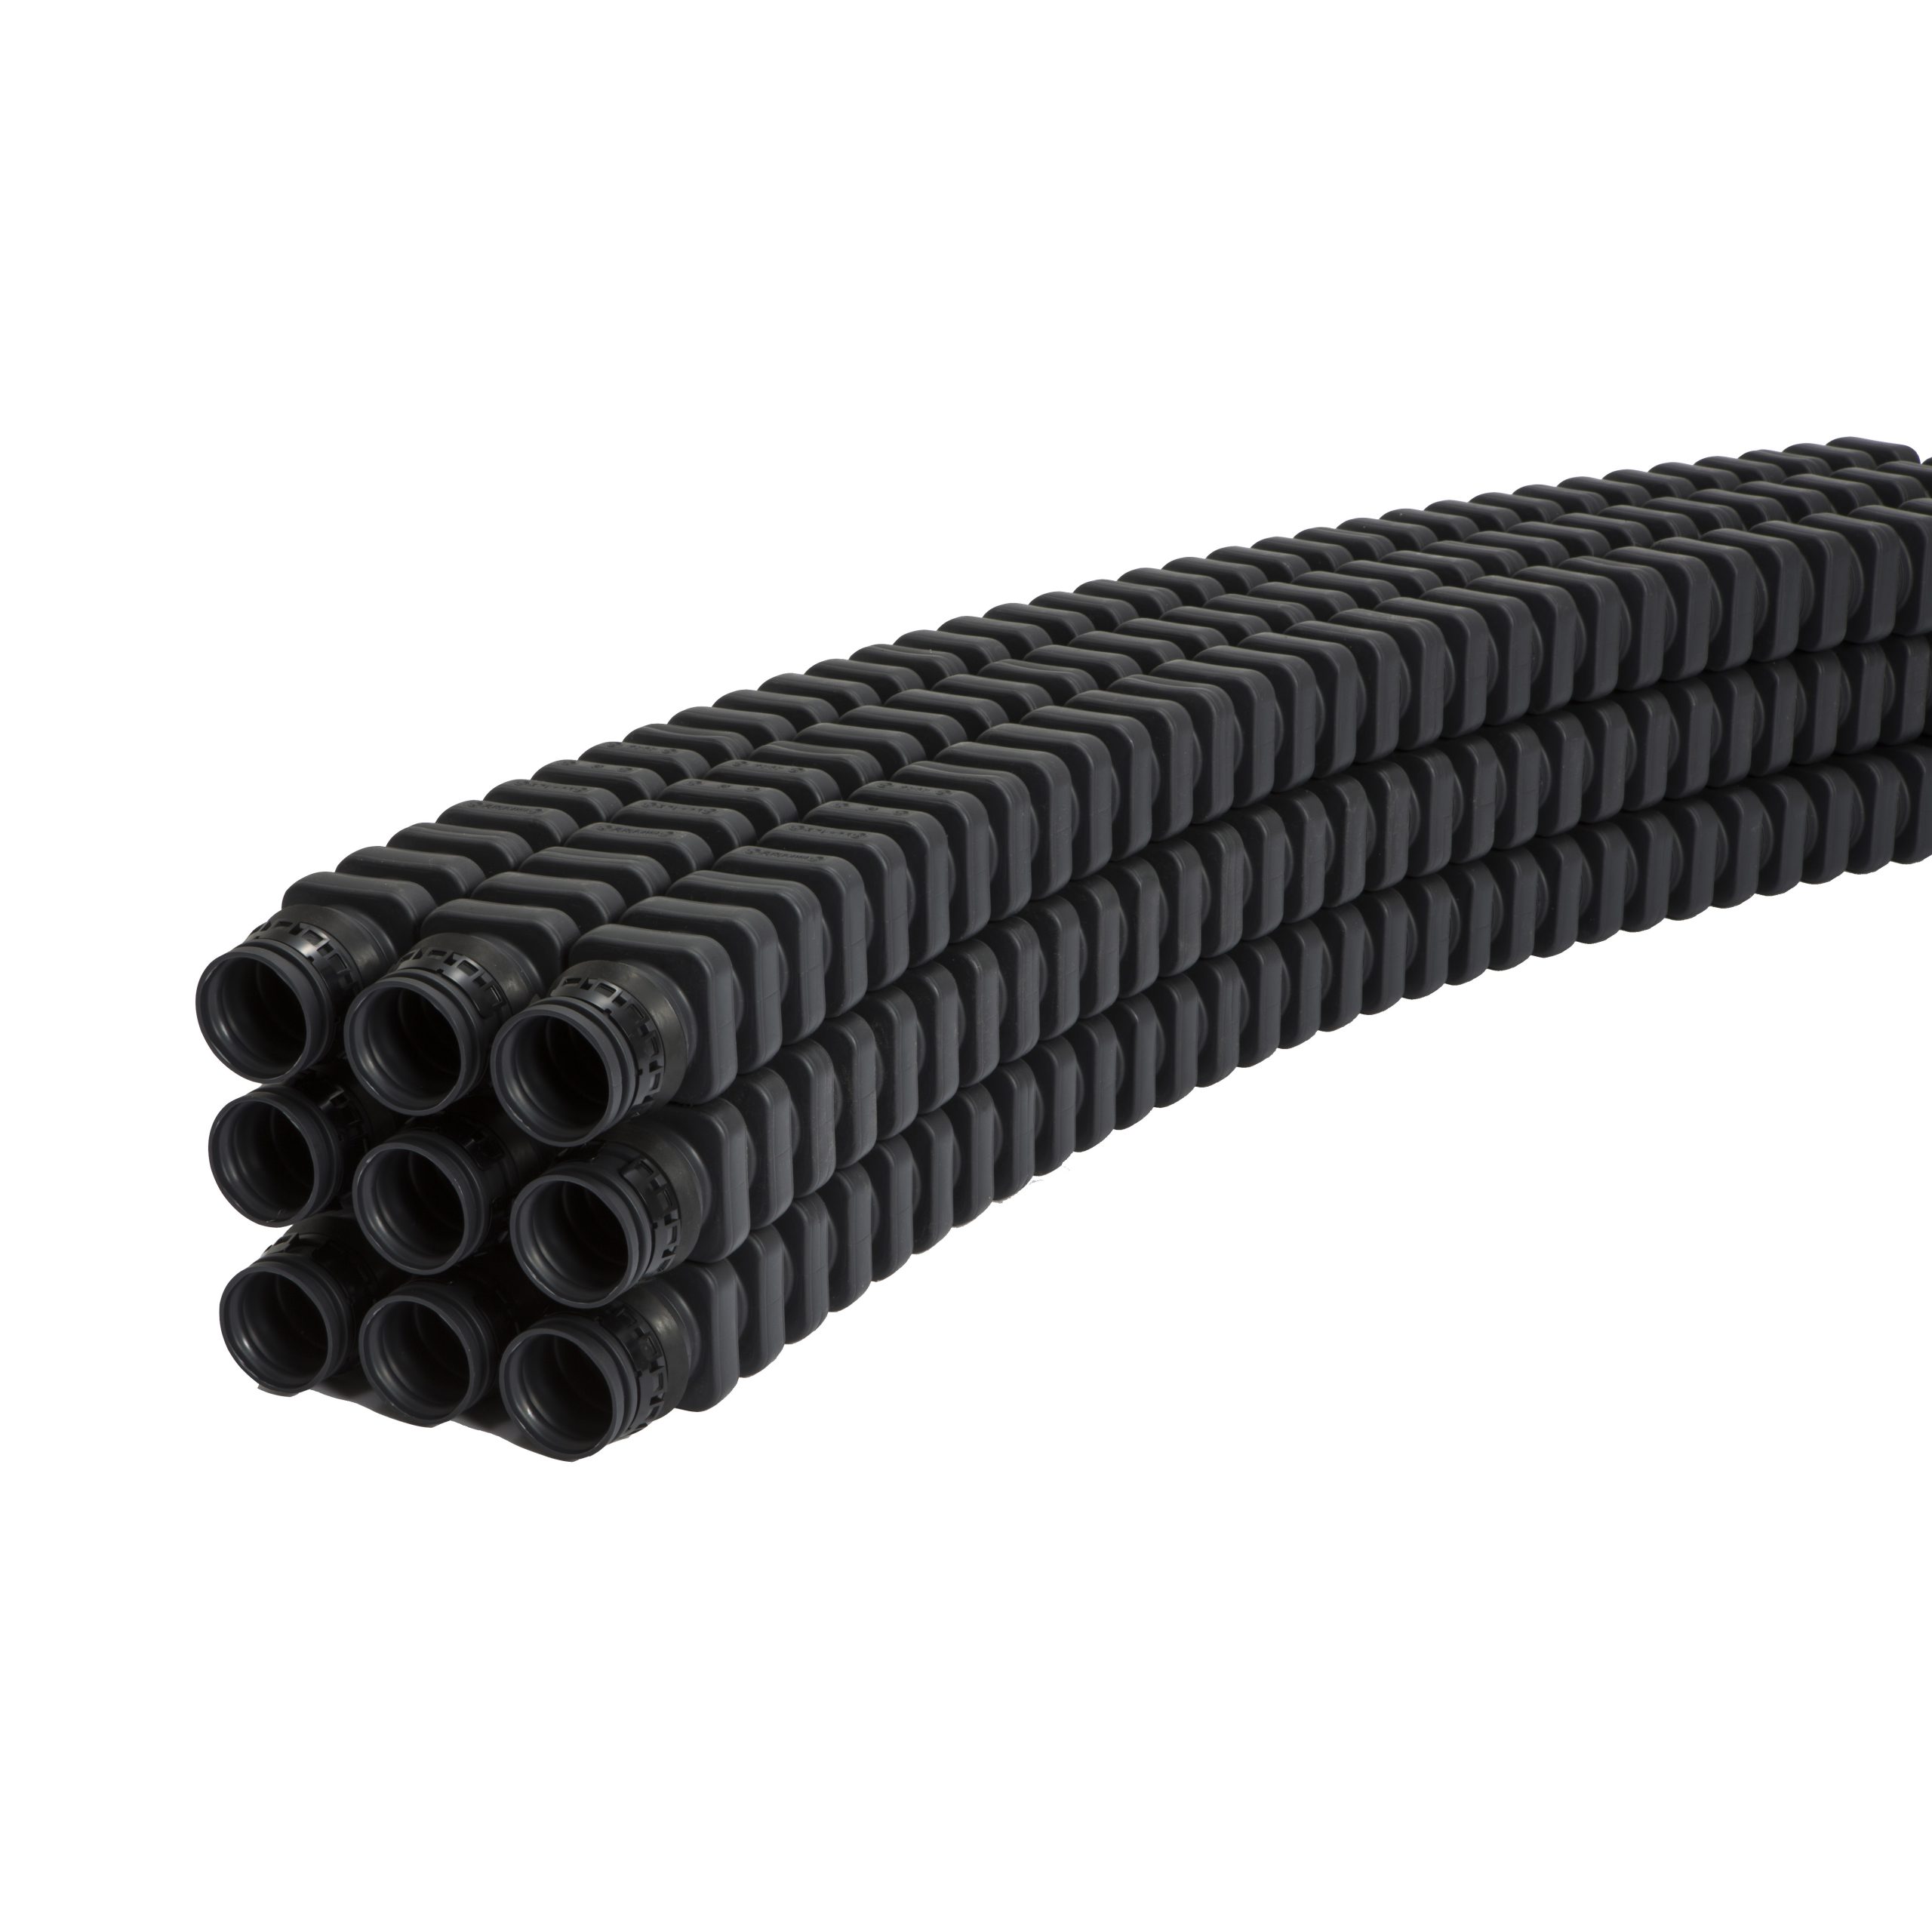 Cable Ducting System